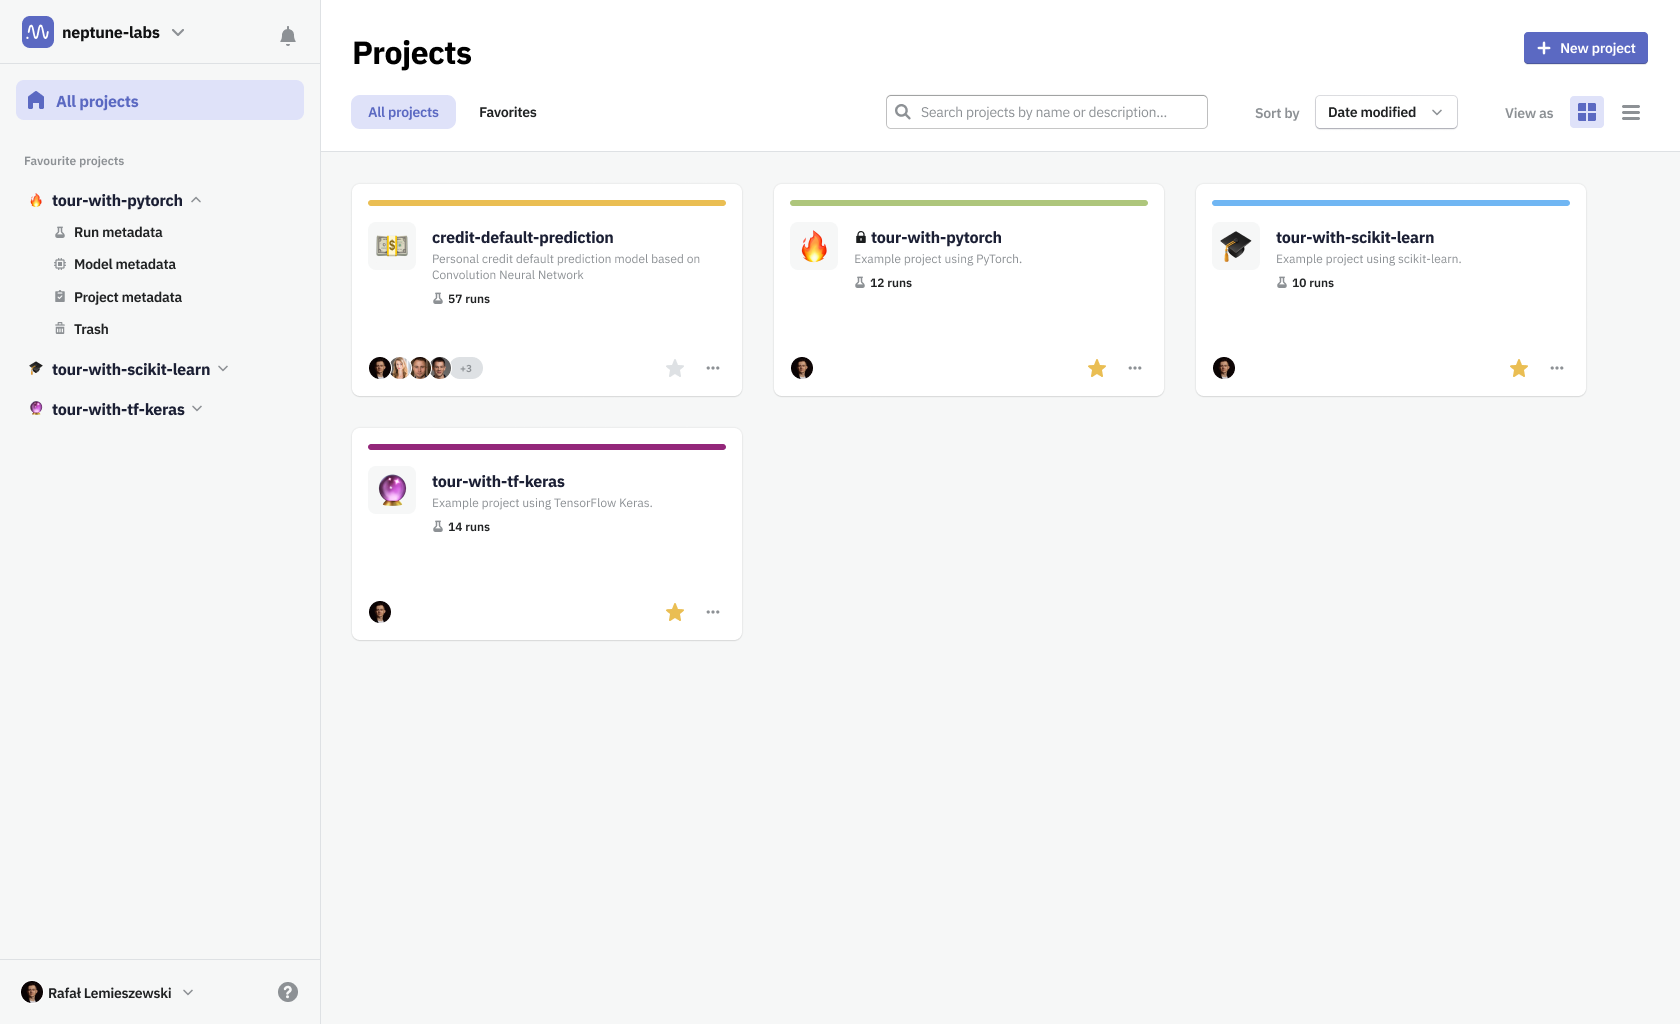 All projects dashboard